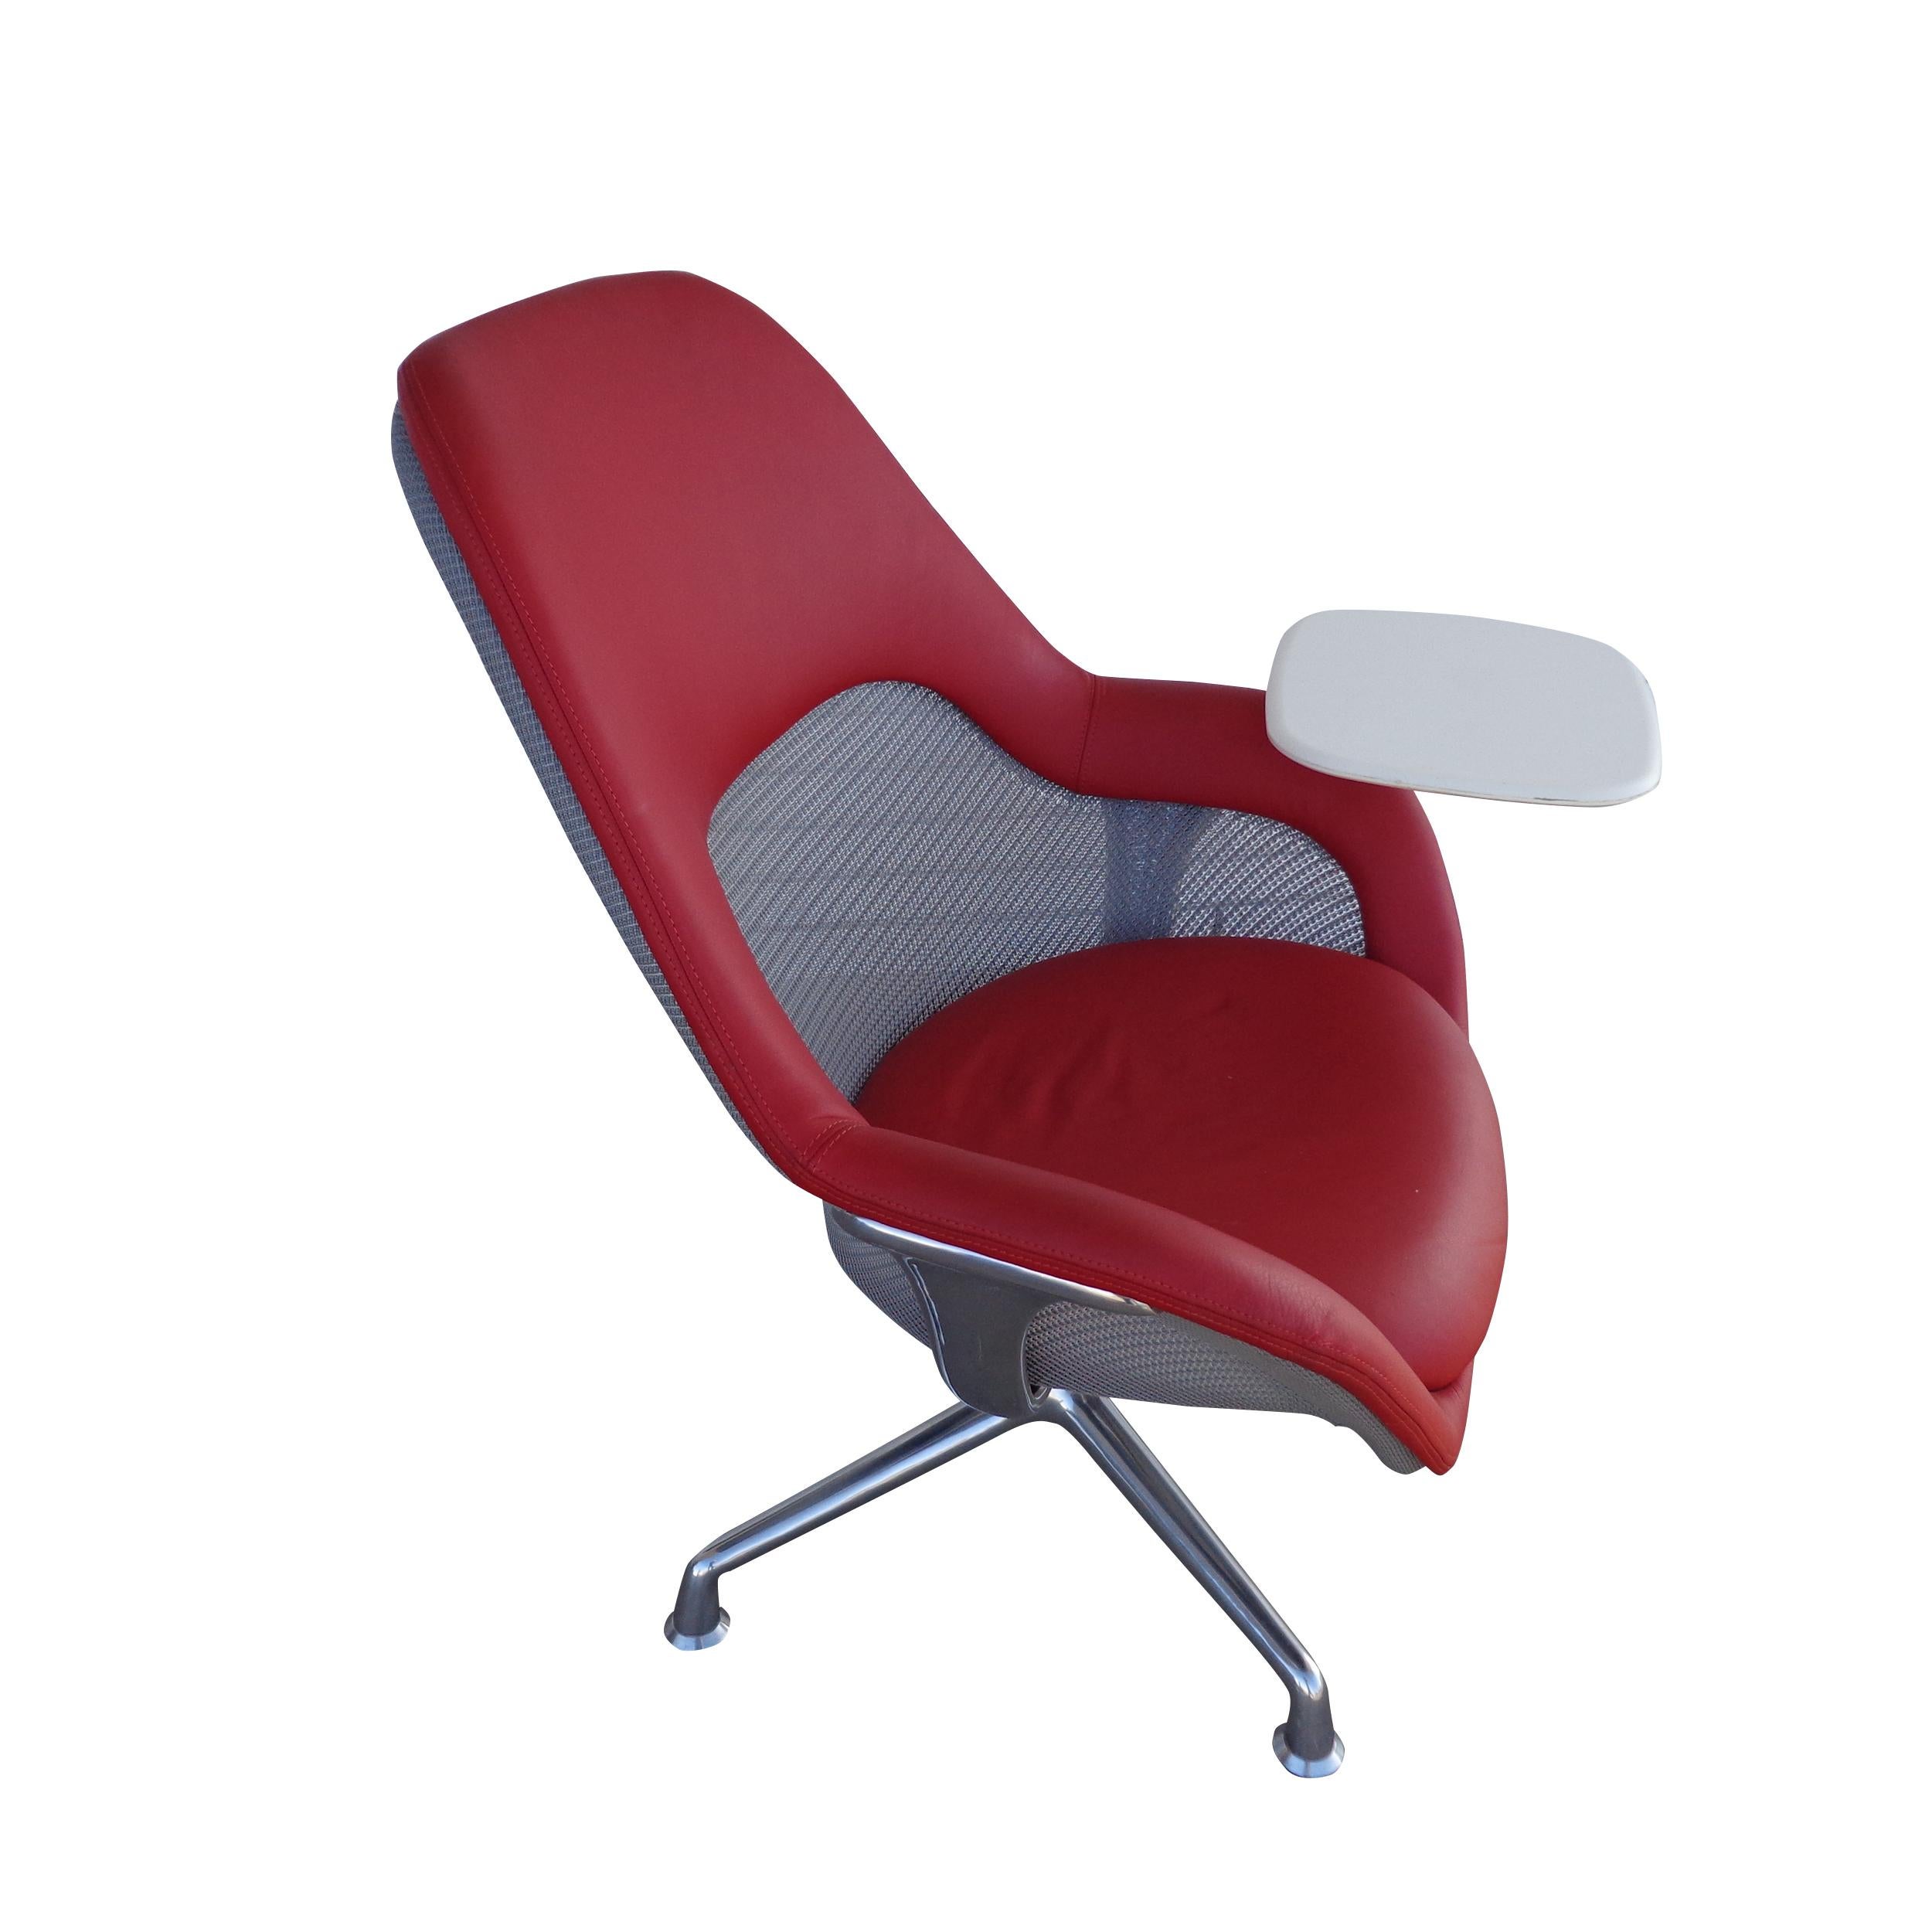 Steelcase I2i Collaborative Ergonomic Dual swivel lounge chair with tablet
Designed in collaboration with Thomas Overthun of Ideo.

Features an independently dual swivel mechanism with a flexible back shell that provides comfort and